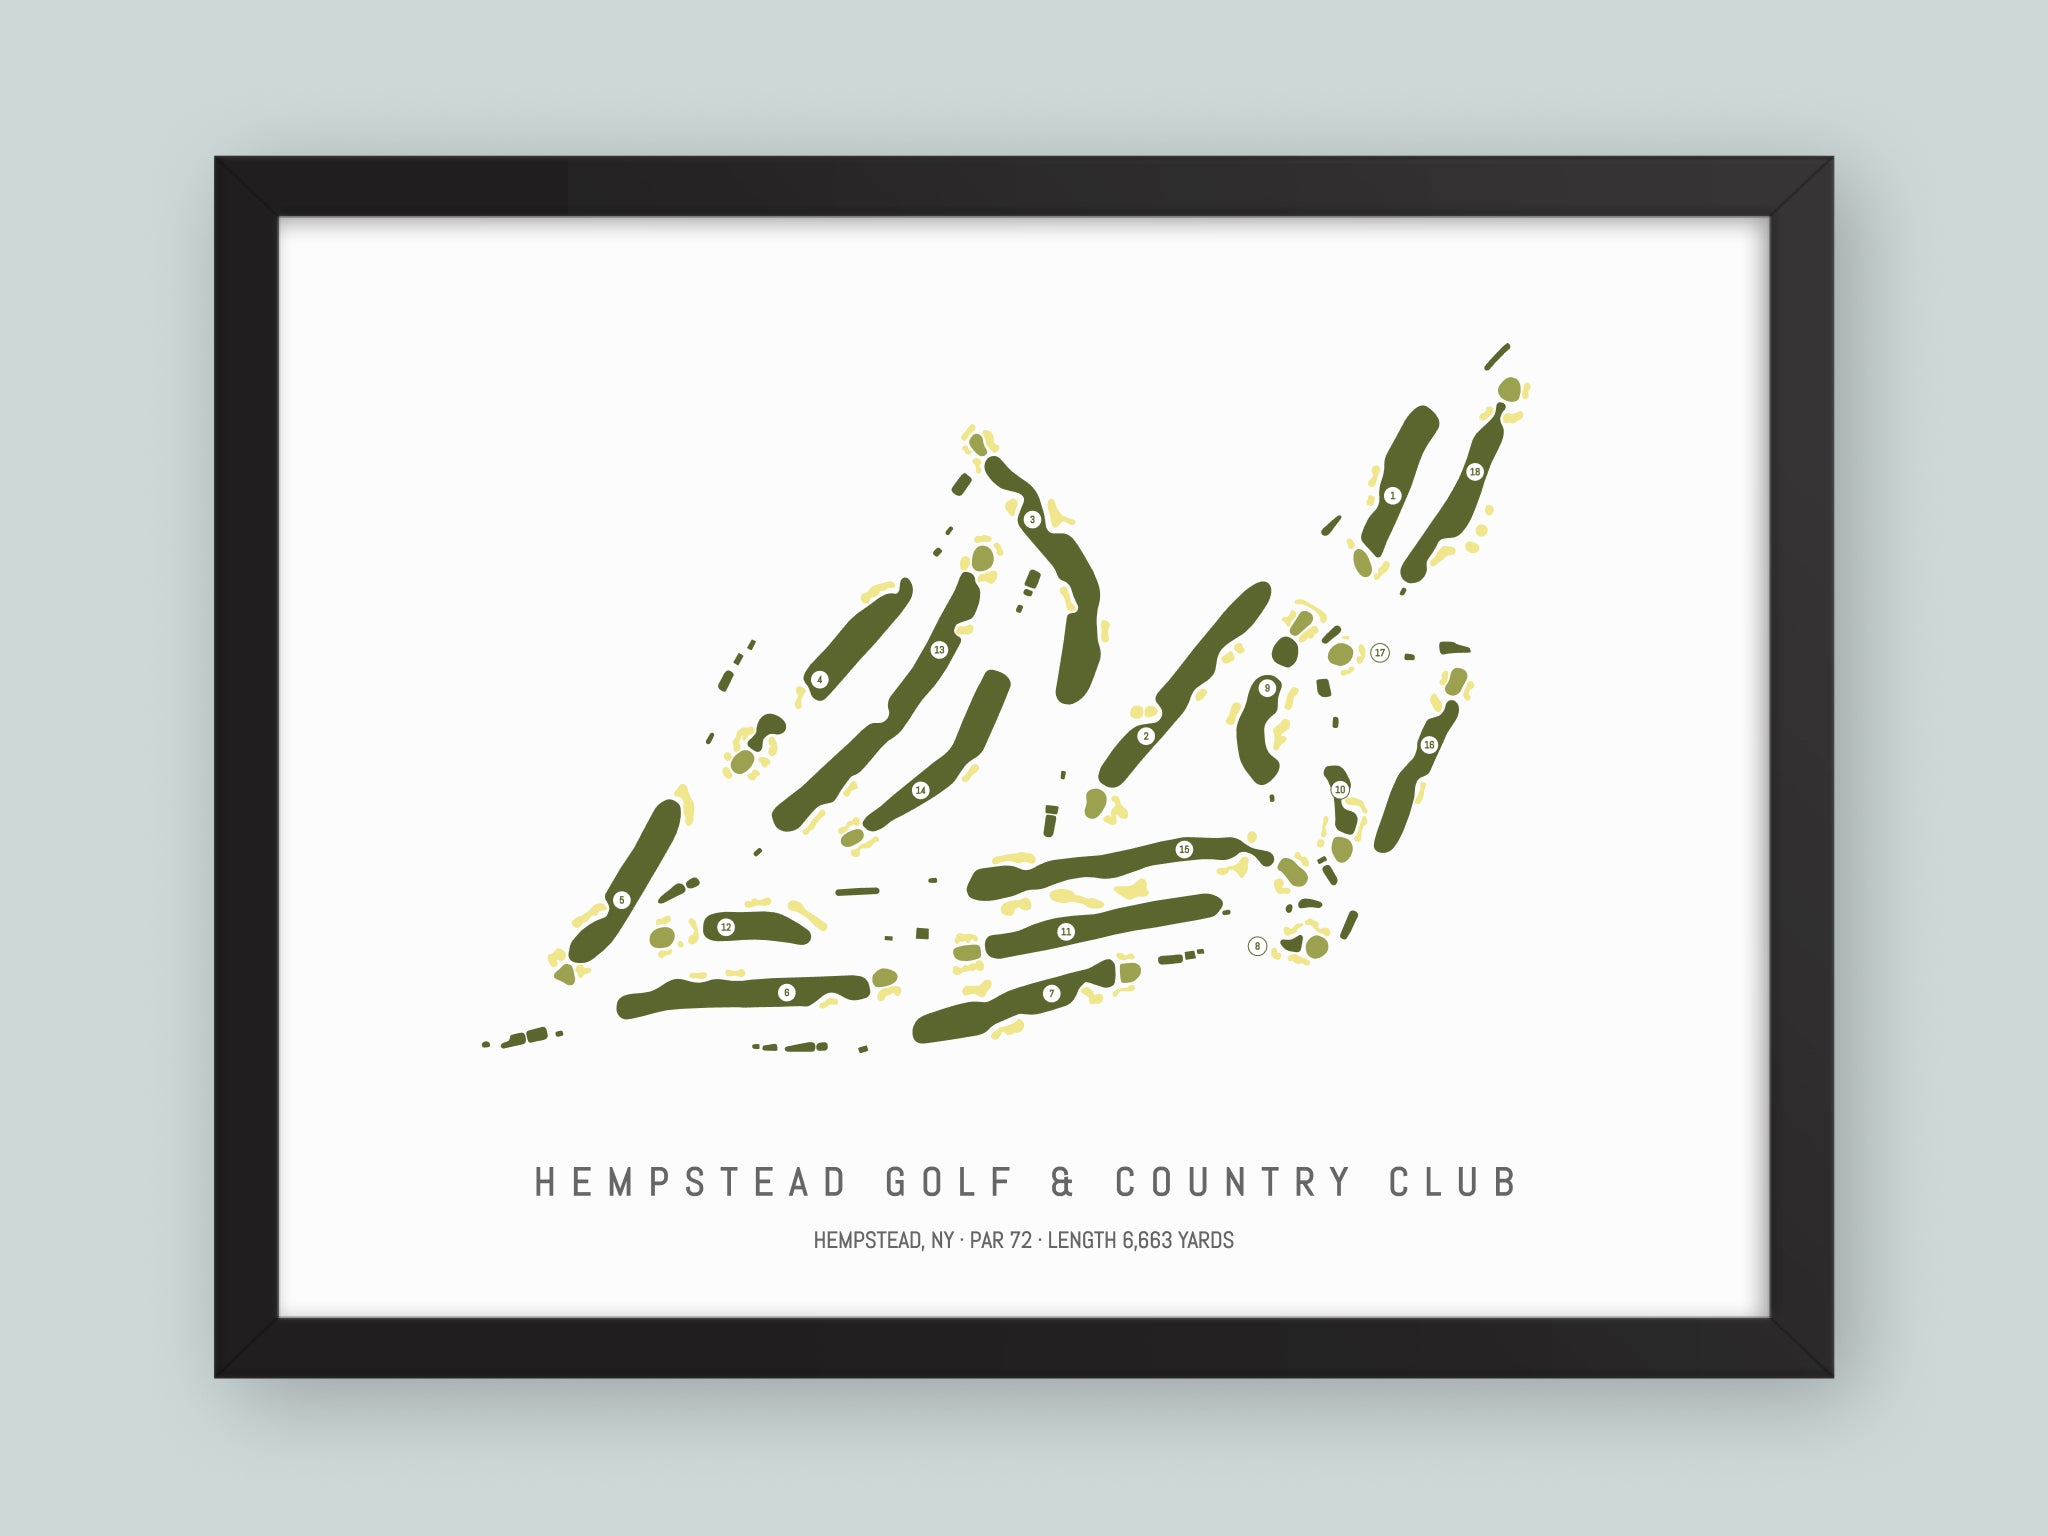 Hempstead-Golf-And-Country-Club-NY--Black-Frame-24x18-With-Hole-Numbers